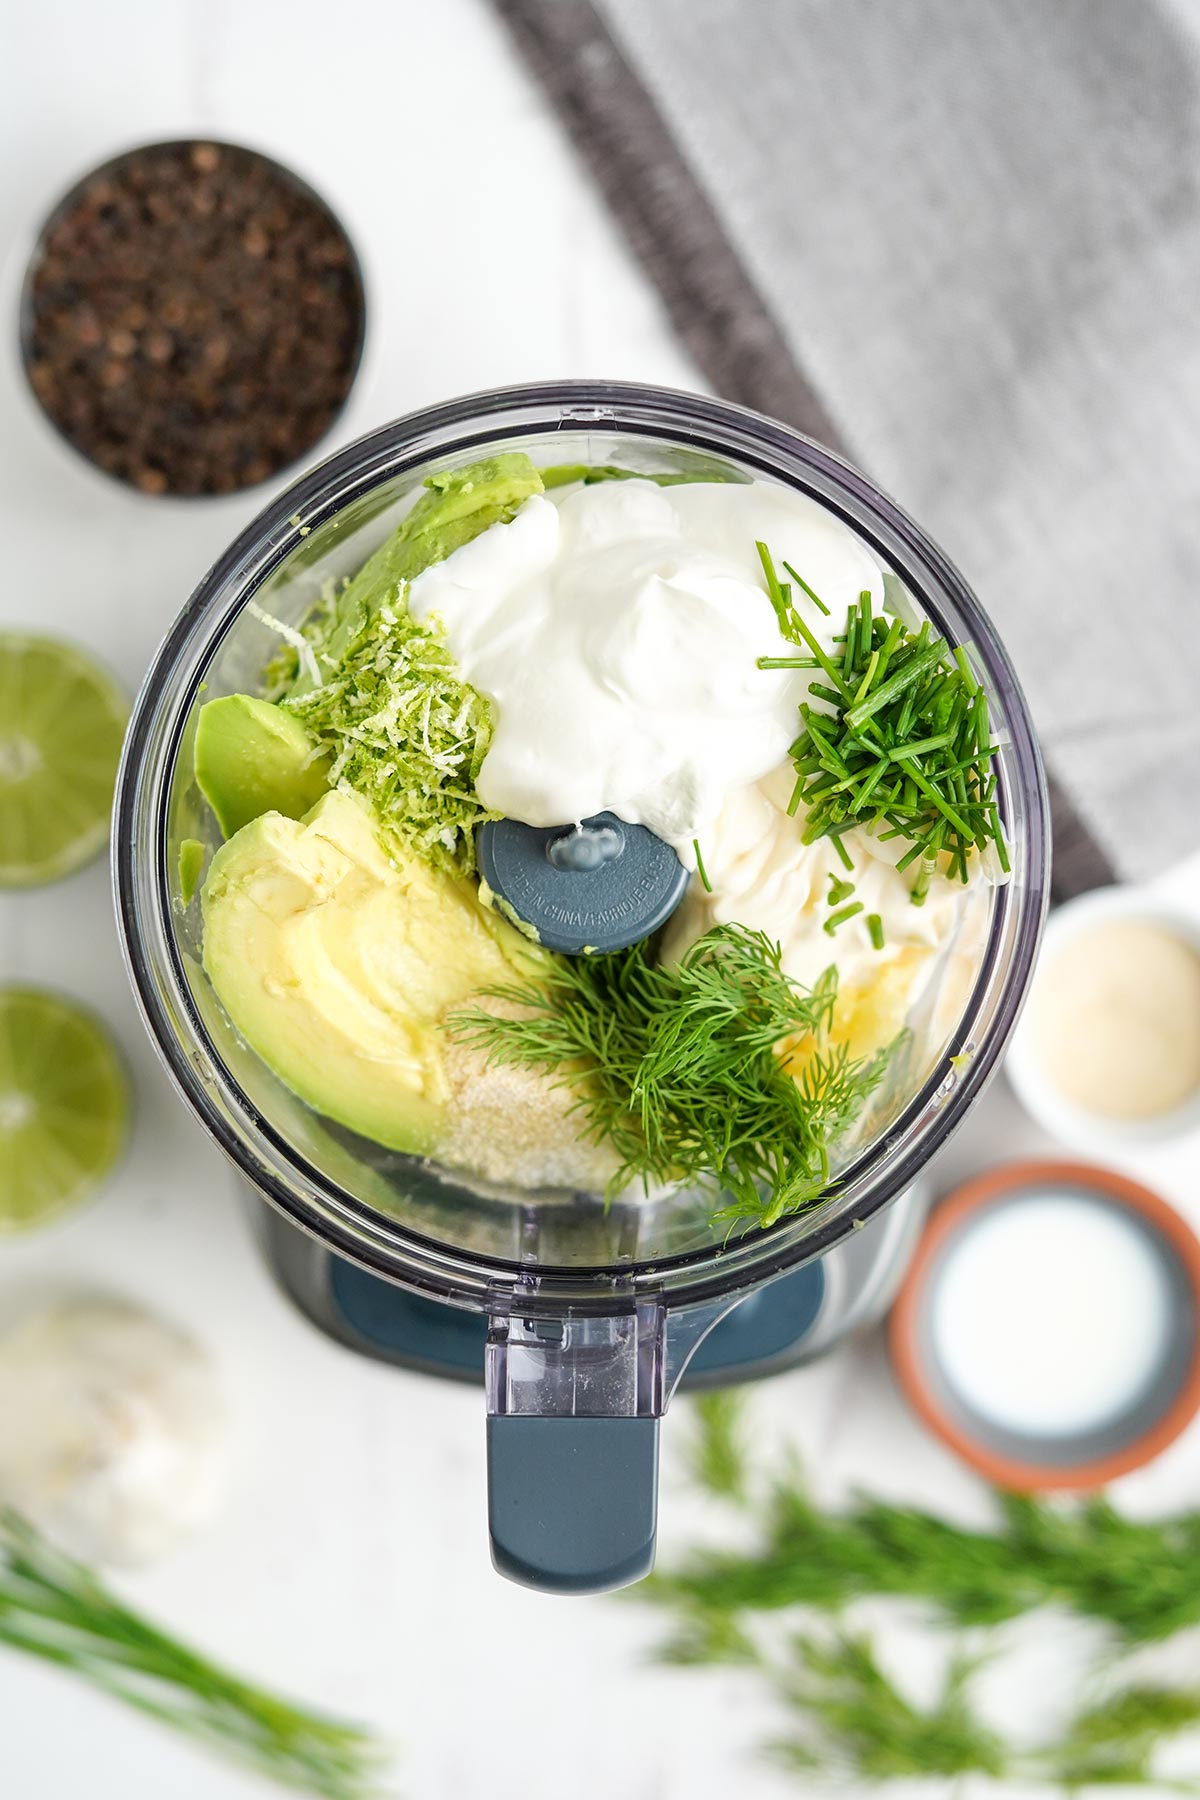 All the ingredients to make avocado lime ranch dressing in a food processor to mix.